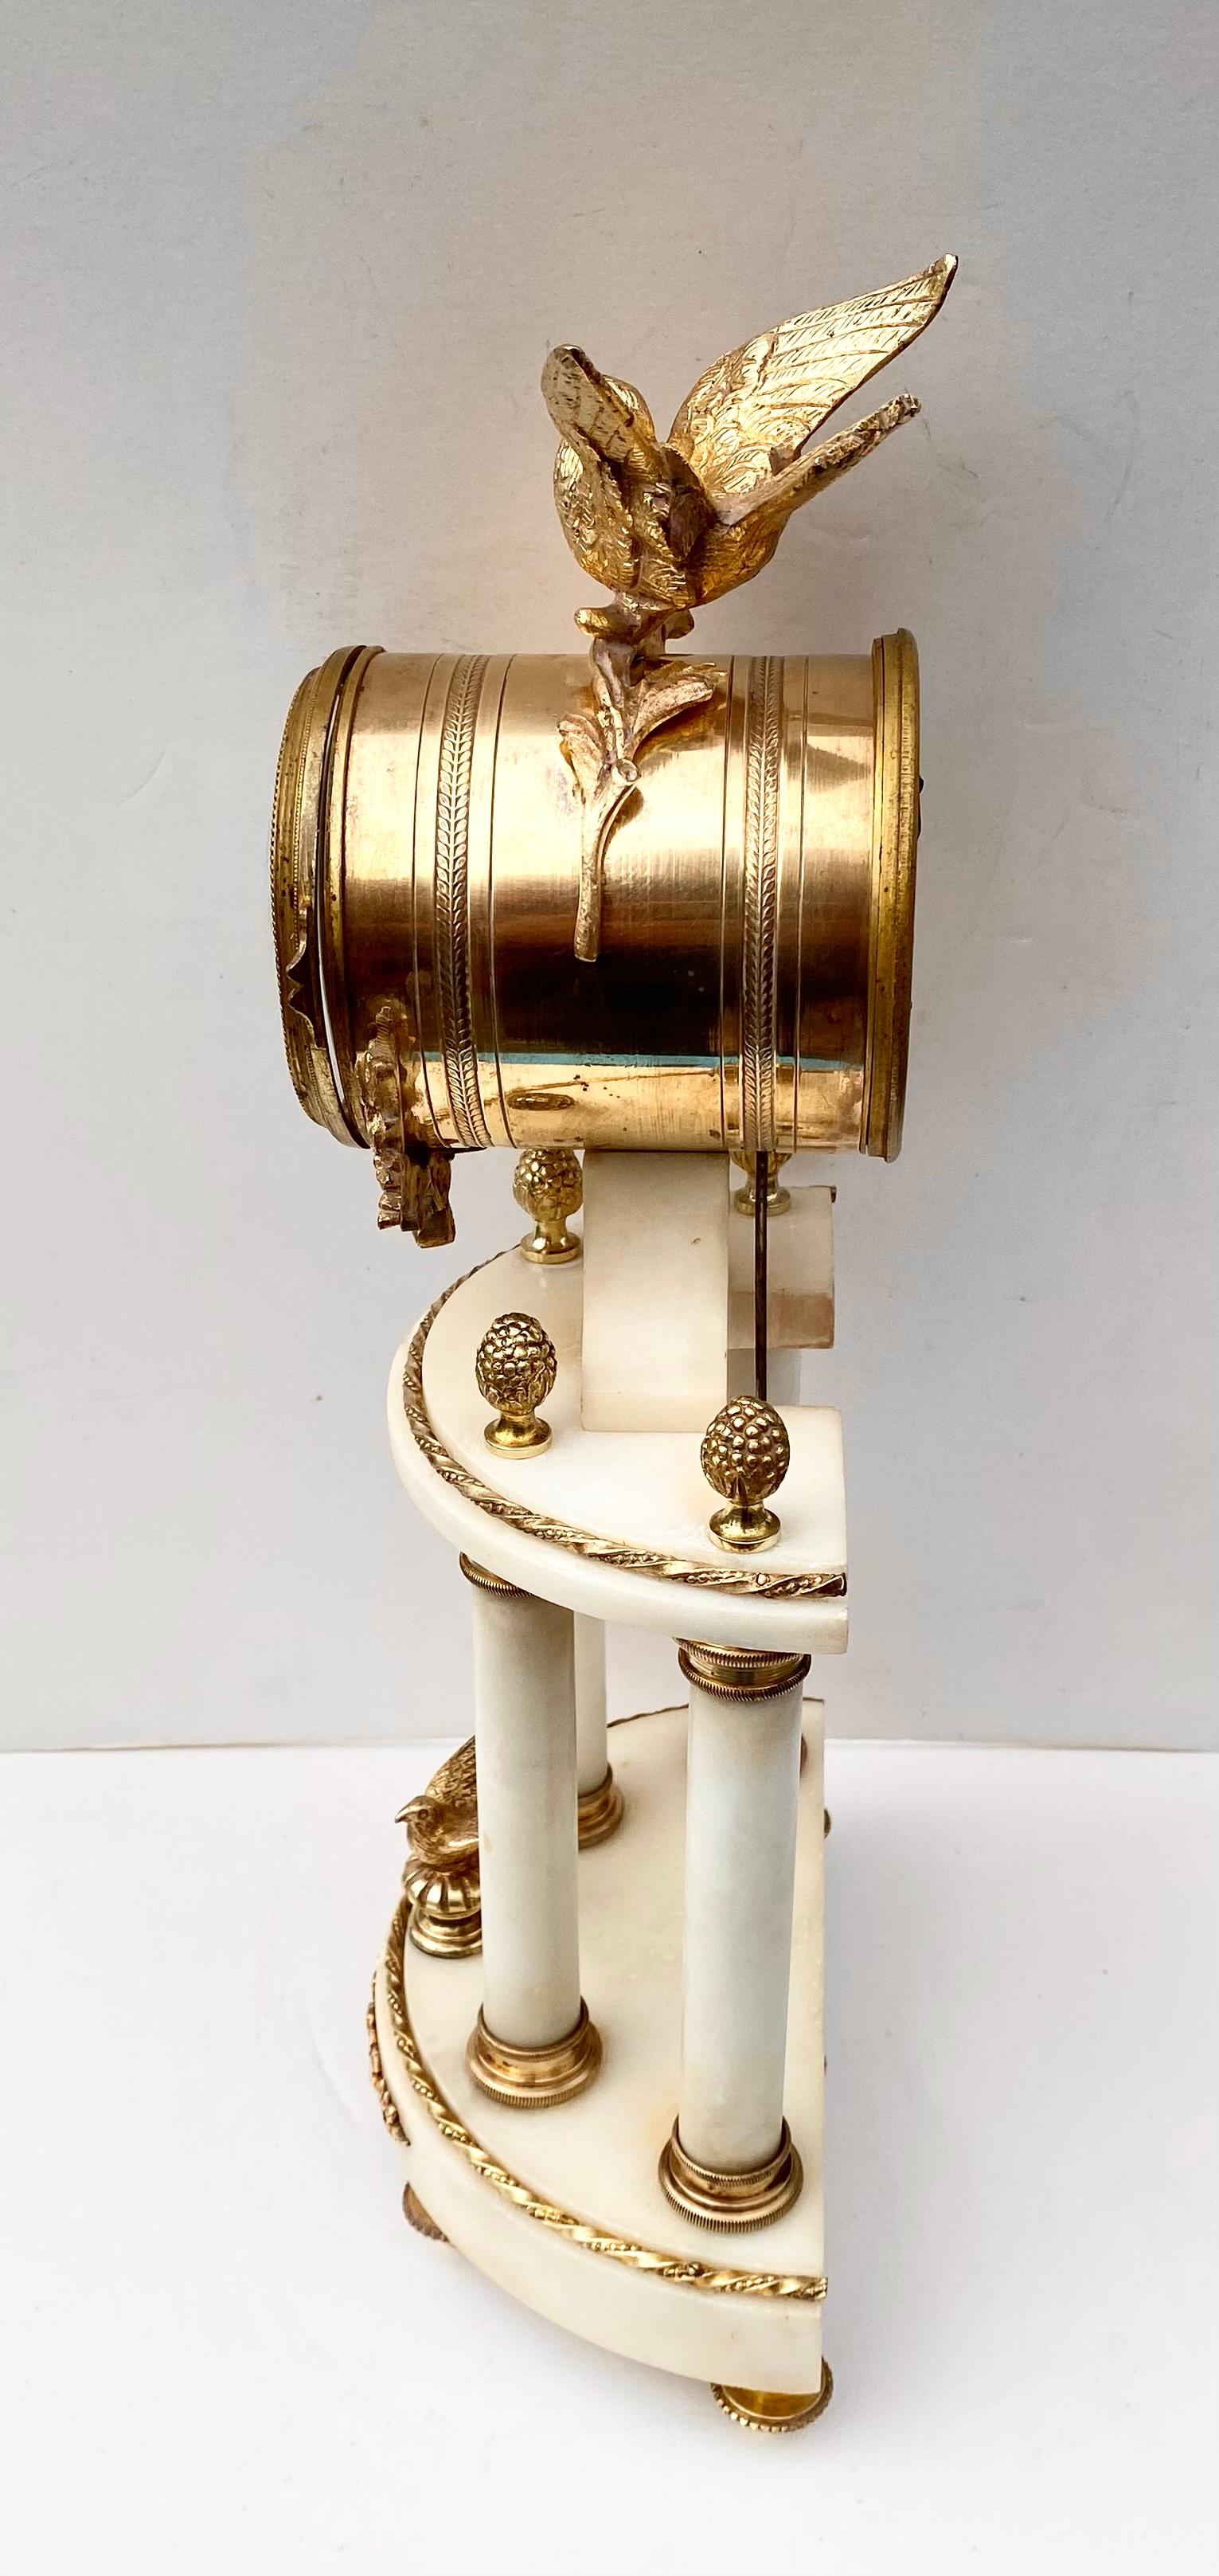 An antique Louis XVI style clock in white marble and gilded bronze.

The clock rests on four small beaded bronze feet   There are four smooth cylindrical columns in white marble, embellished with gilded bronze beaded capitals that support demi-lune